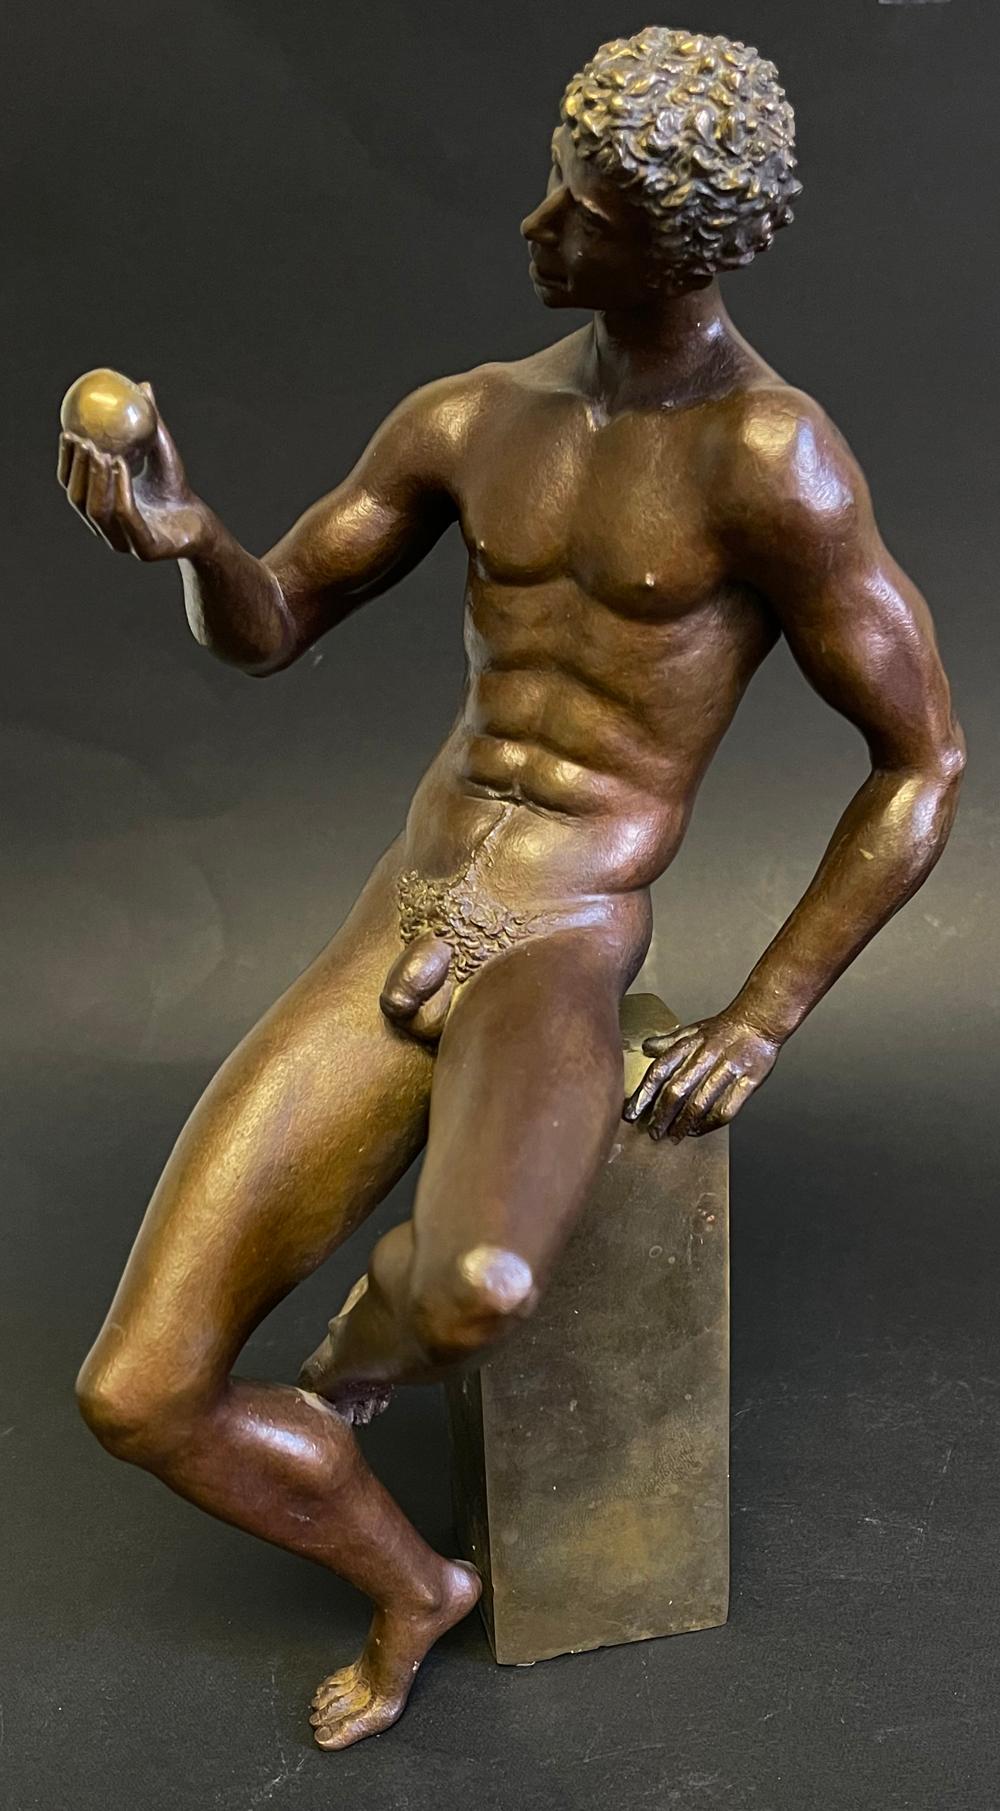 Rare and striking, this mid century bronze by Nathaniel Choate -- best known for his large sculptures at Brookgreen Gardens in South Carolina -- depicts a seated, nude Adam figure, quizzically examining the fateful apple. Choate was one of the